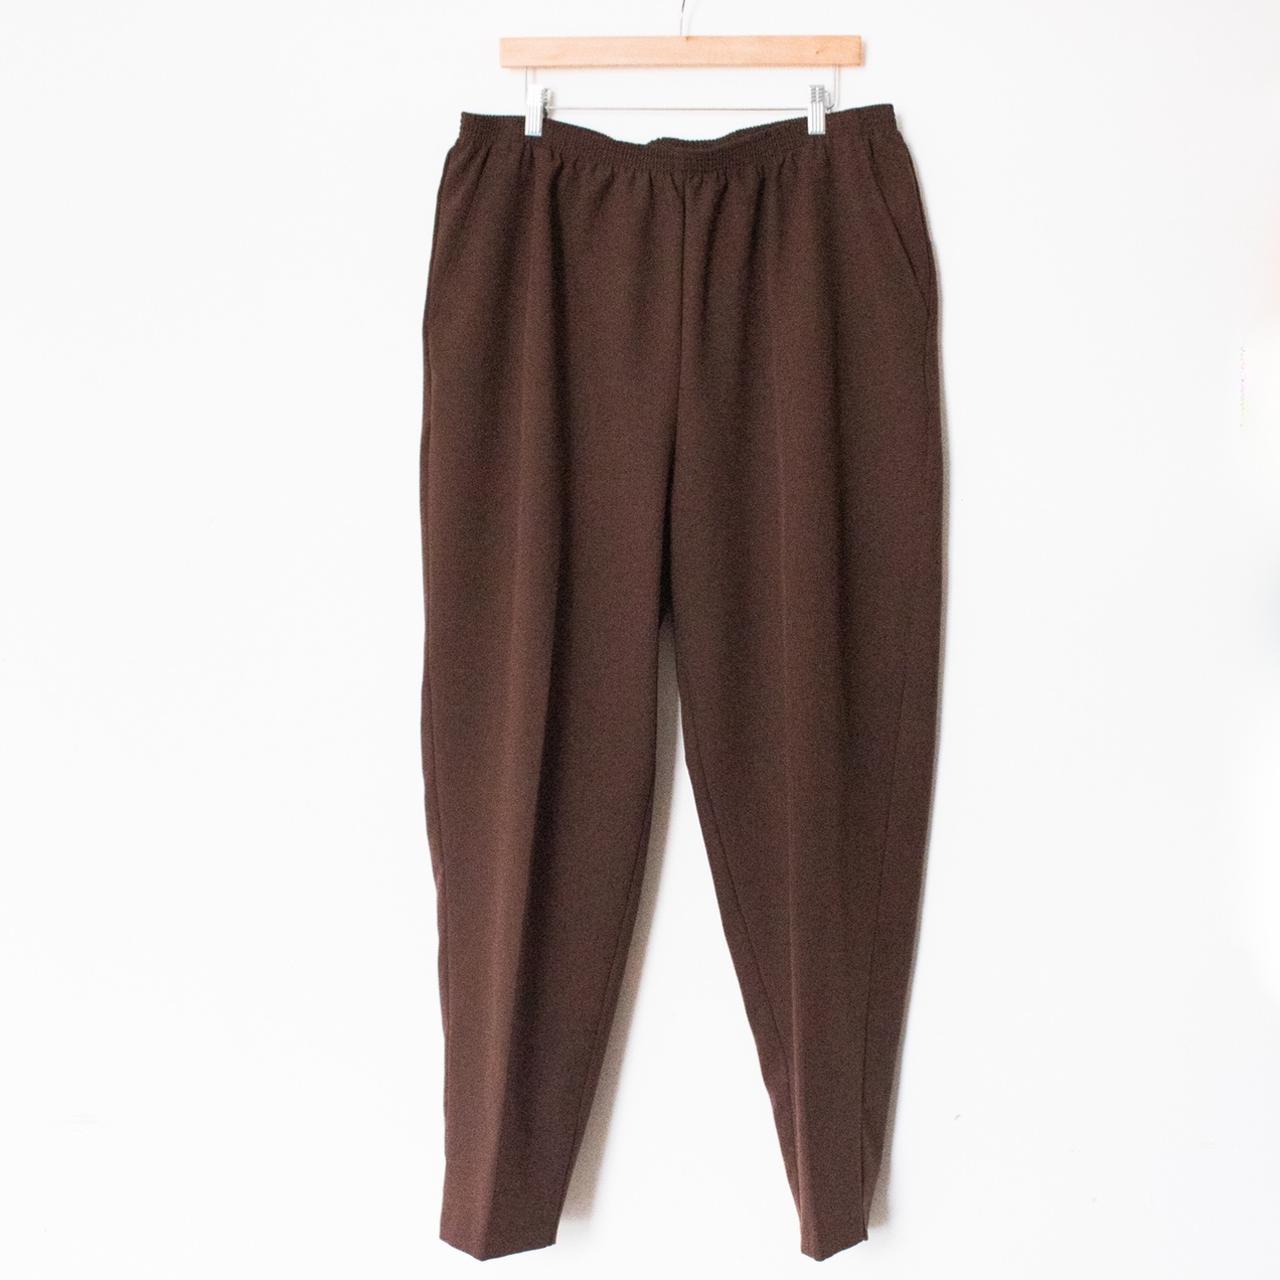 Pants with Elastic Band, Brown